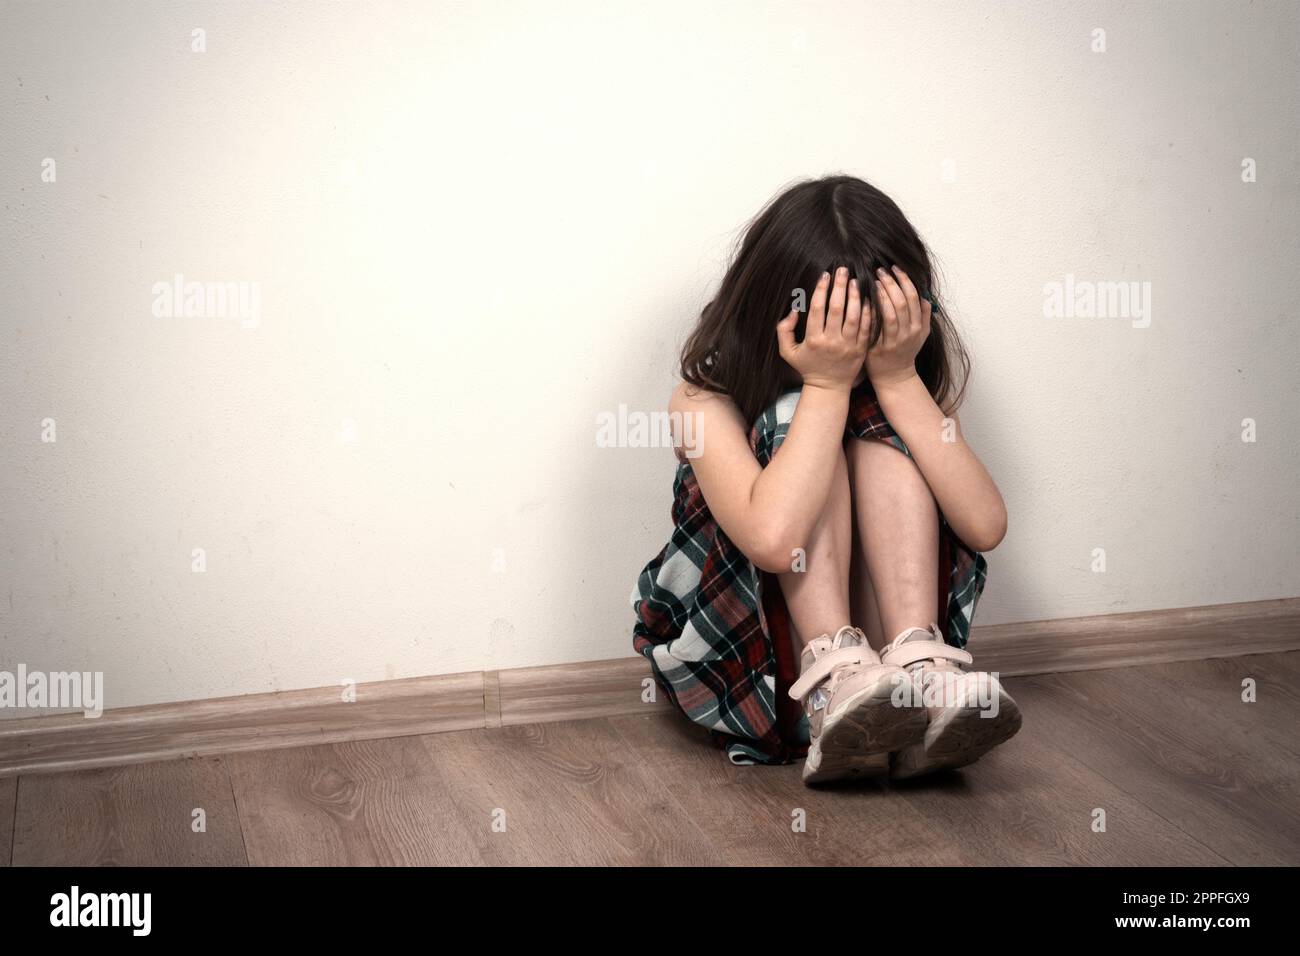 Small girl sitting in depression Stock Photo